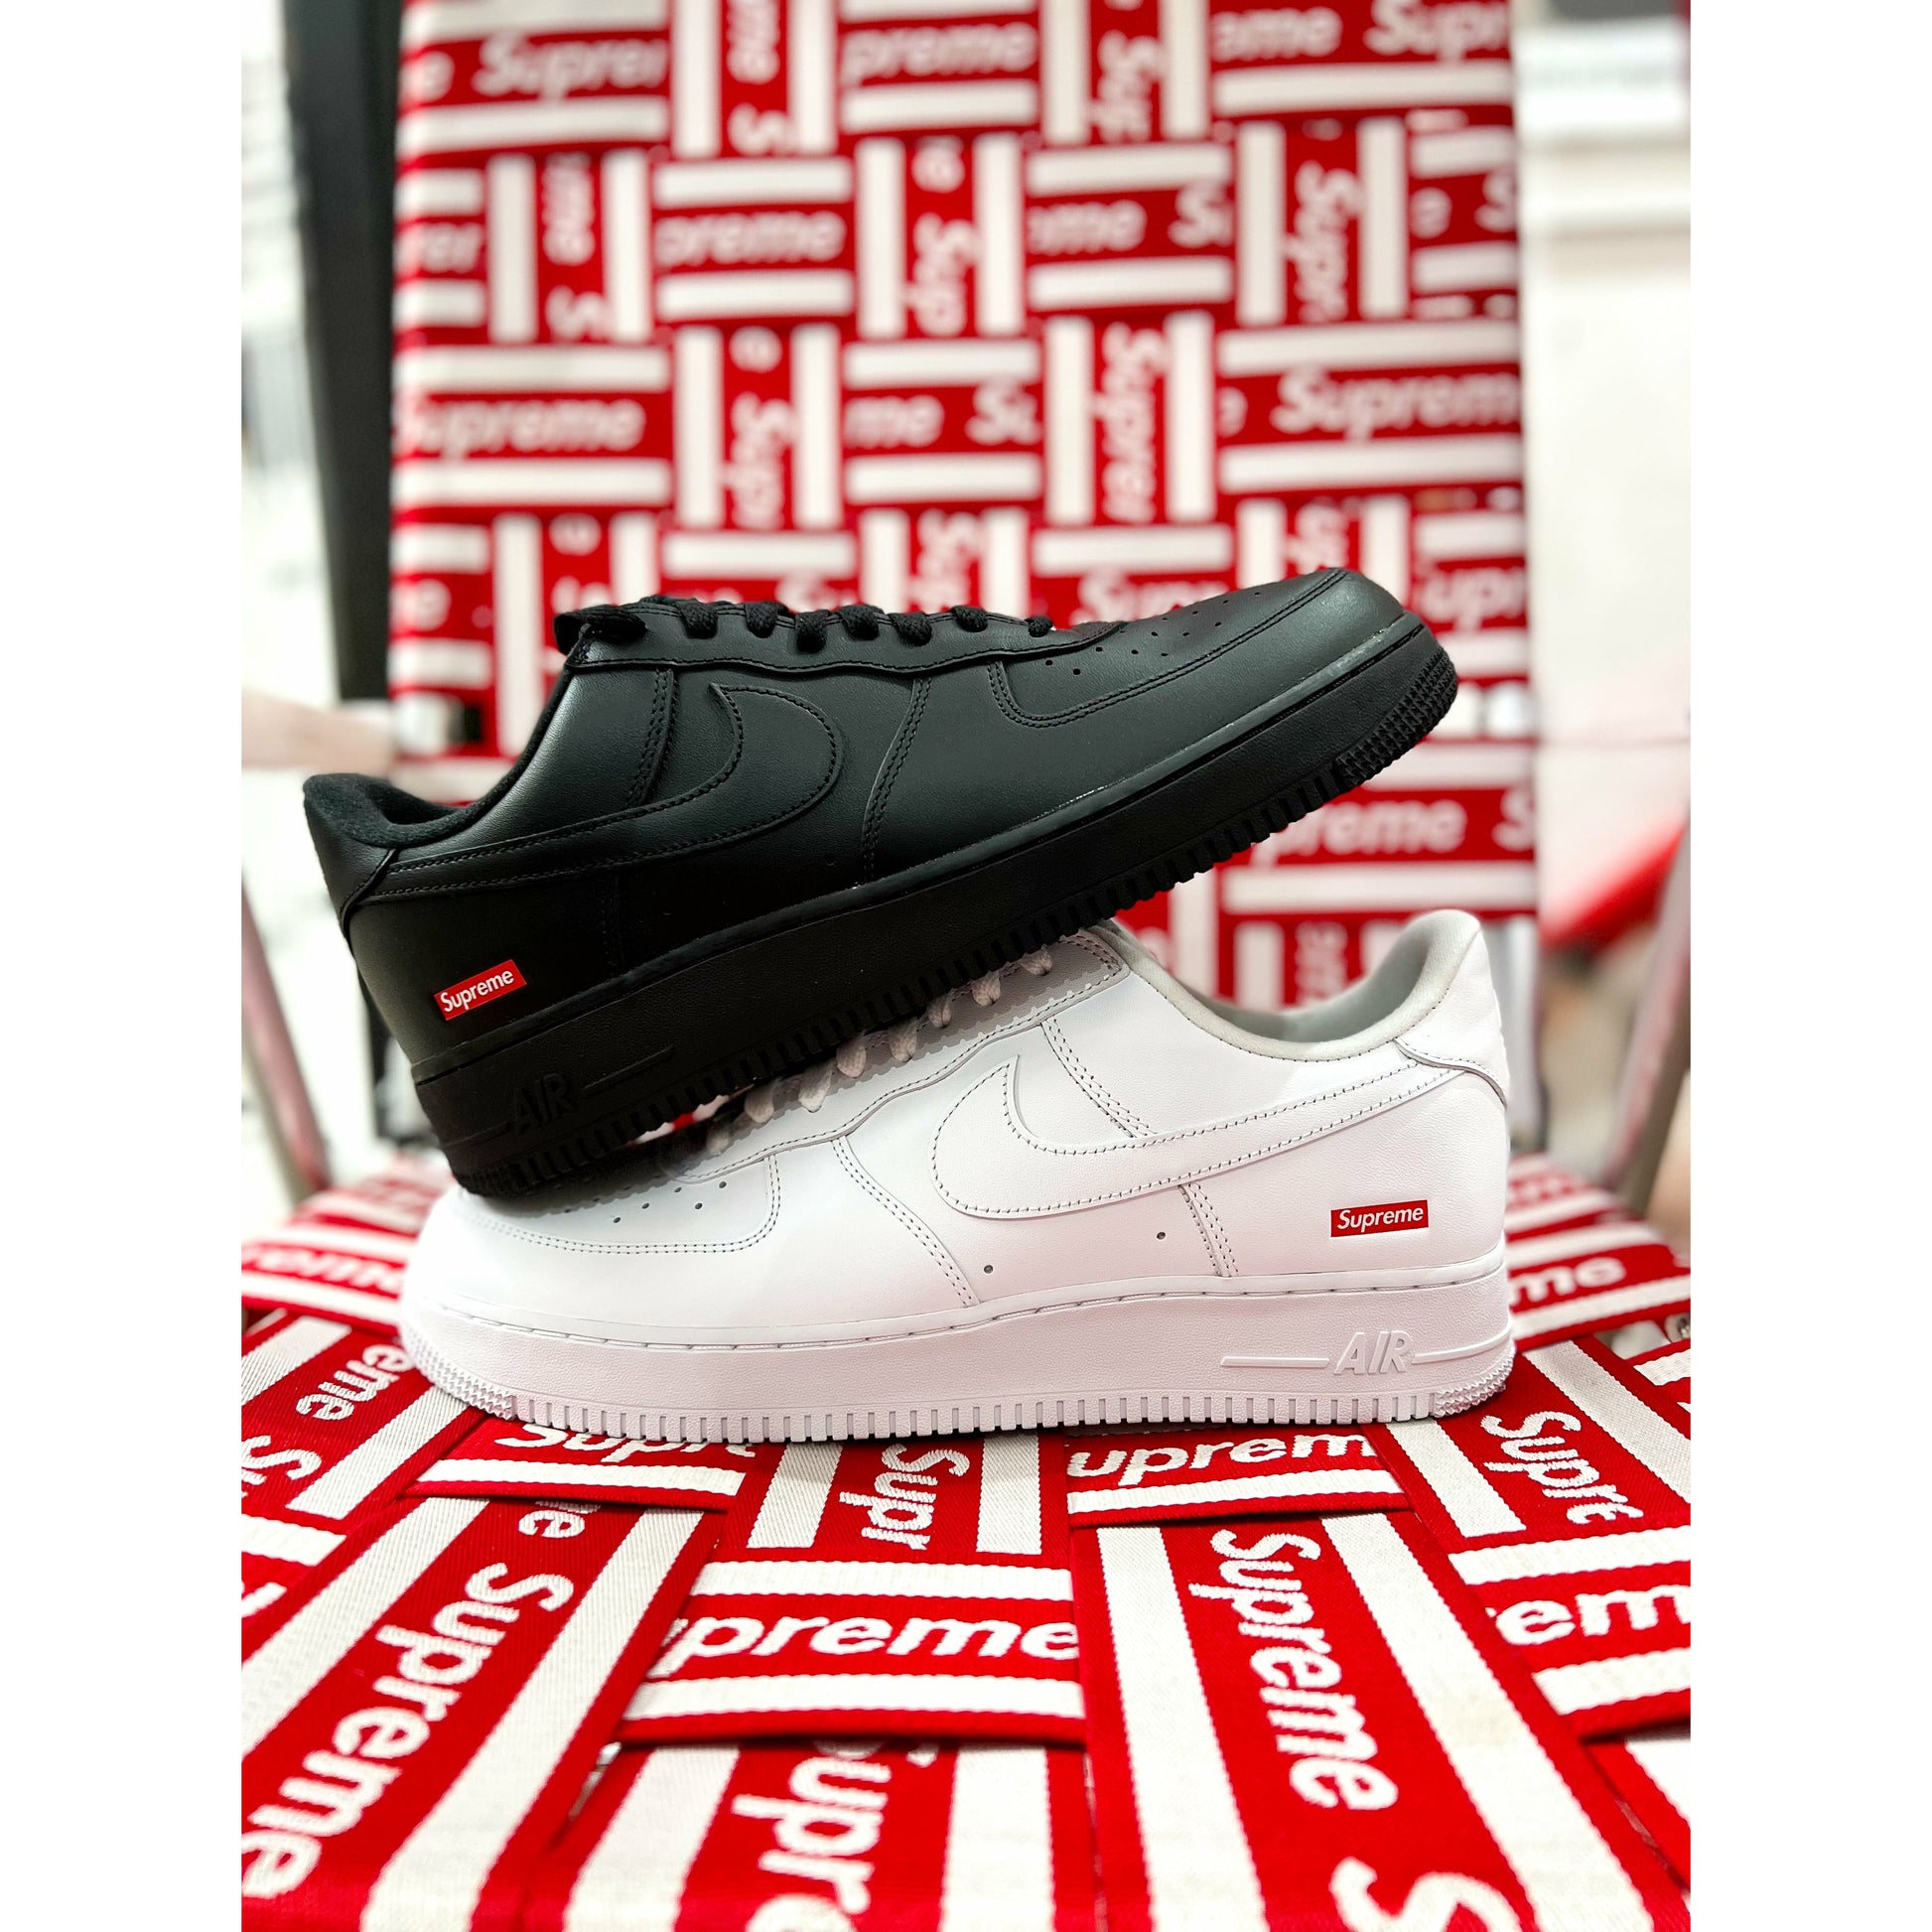 Nike Air Force 1 Low Supreme White from Nike